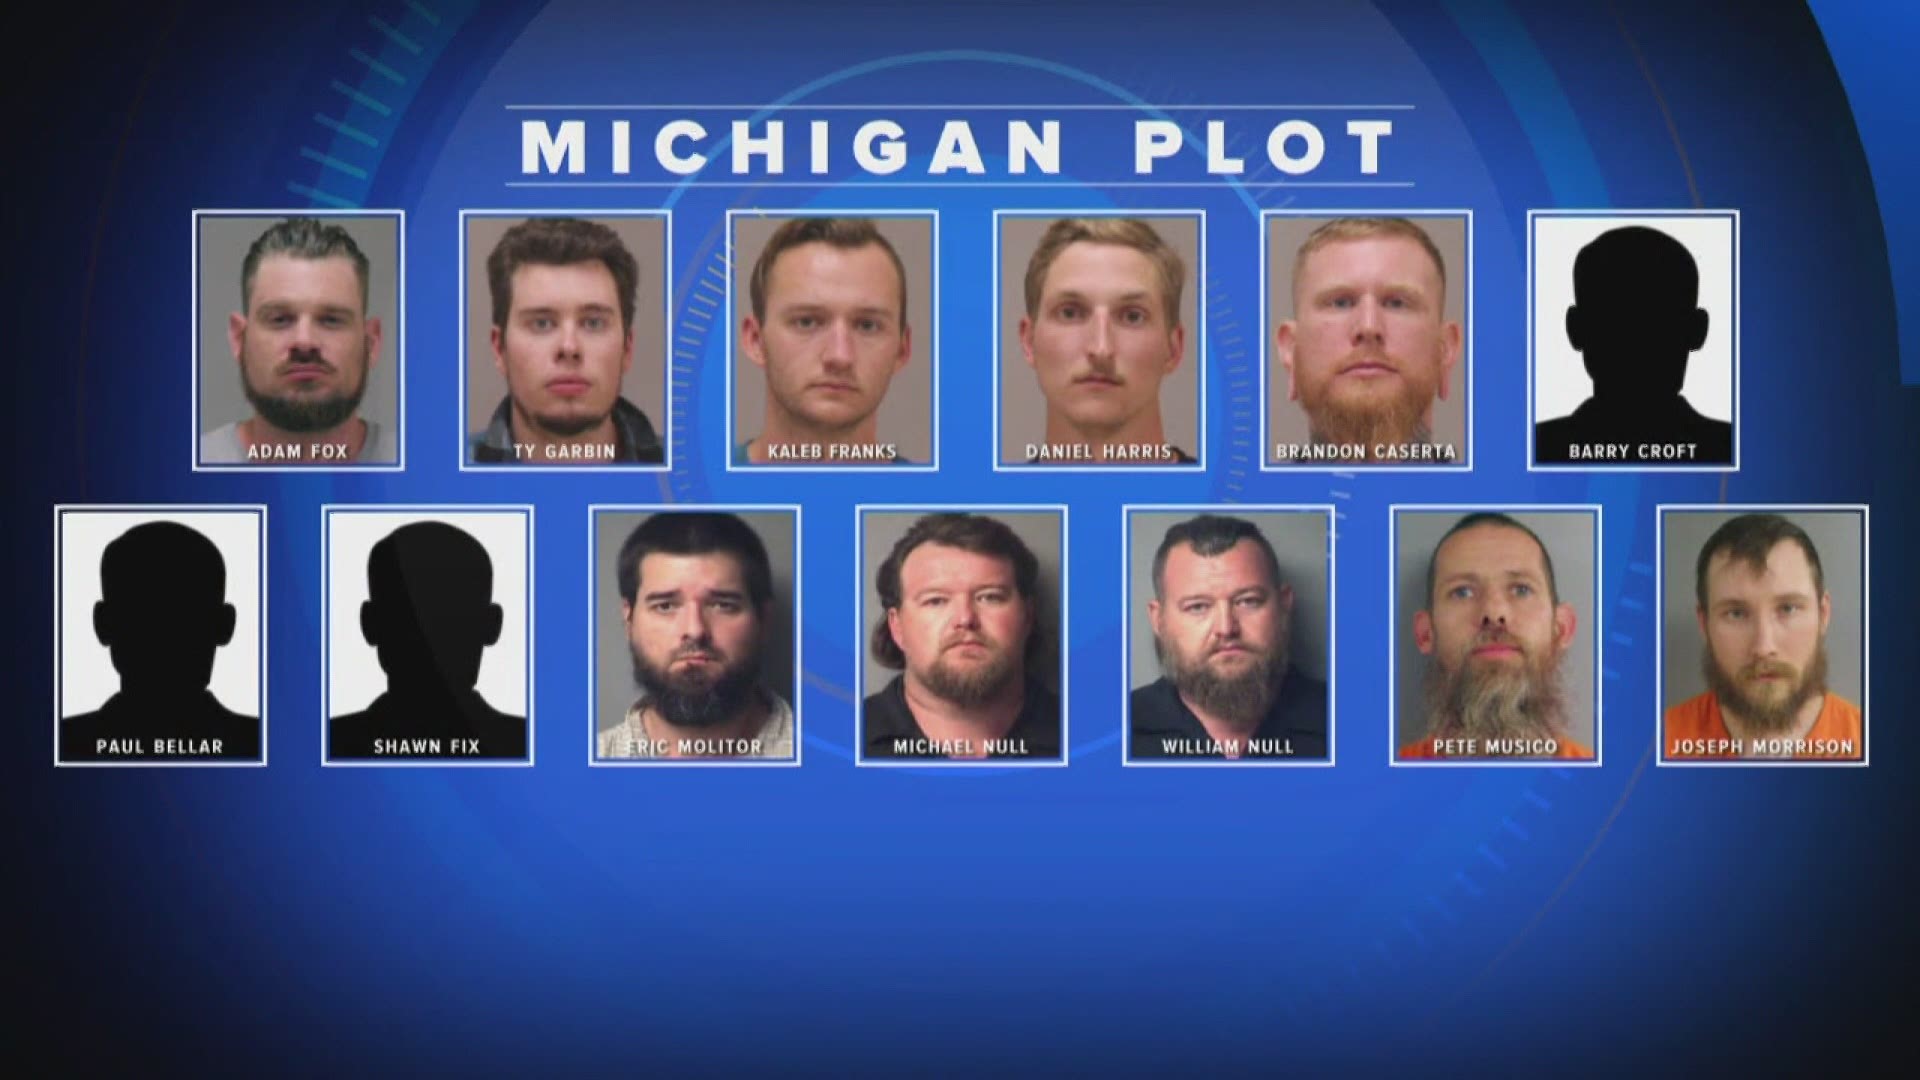 A total of thirteen men are charged in connection with the plot to kidnap the governor. The six others are being prosecuted by the federal government.